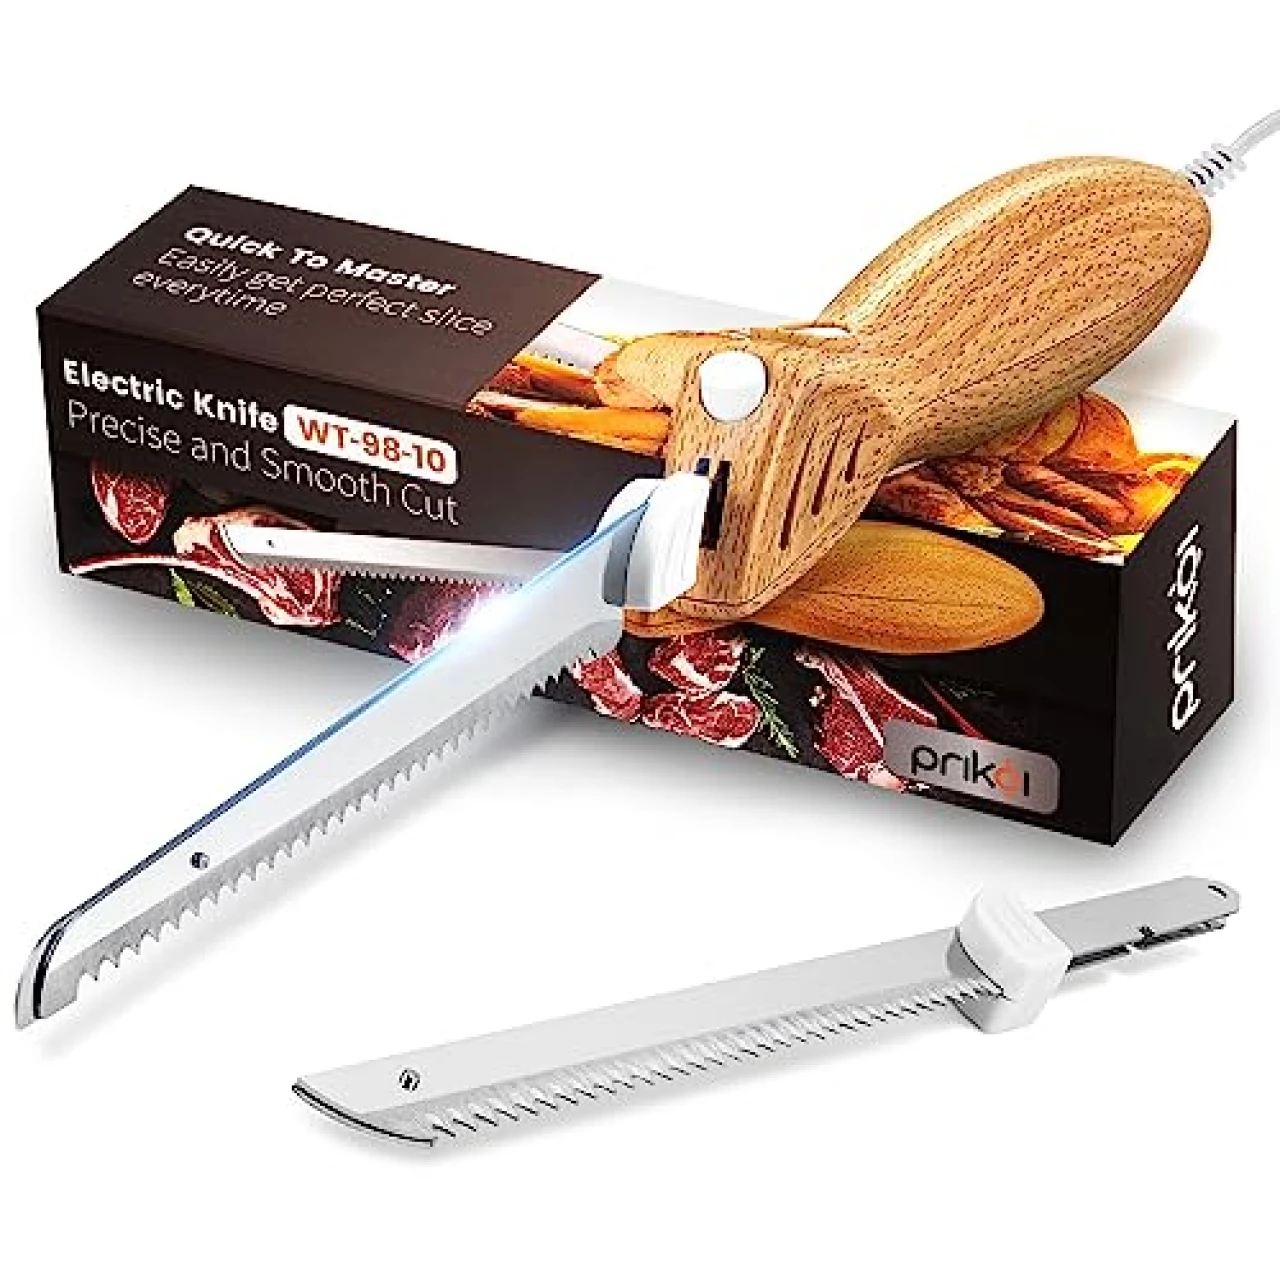 Prikoi Electric Knife - Easy-Slice Serrated Edge Blades for Carving Meat, Bread, Turkey, Ribs, Fillet, DIY, Ergonomic Handle + 2 Blades for Raw &amp; Cooked Food(Faux Wood)